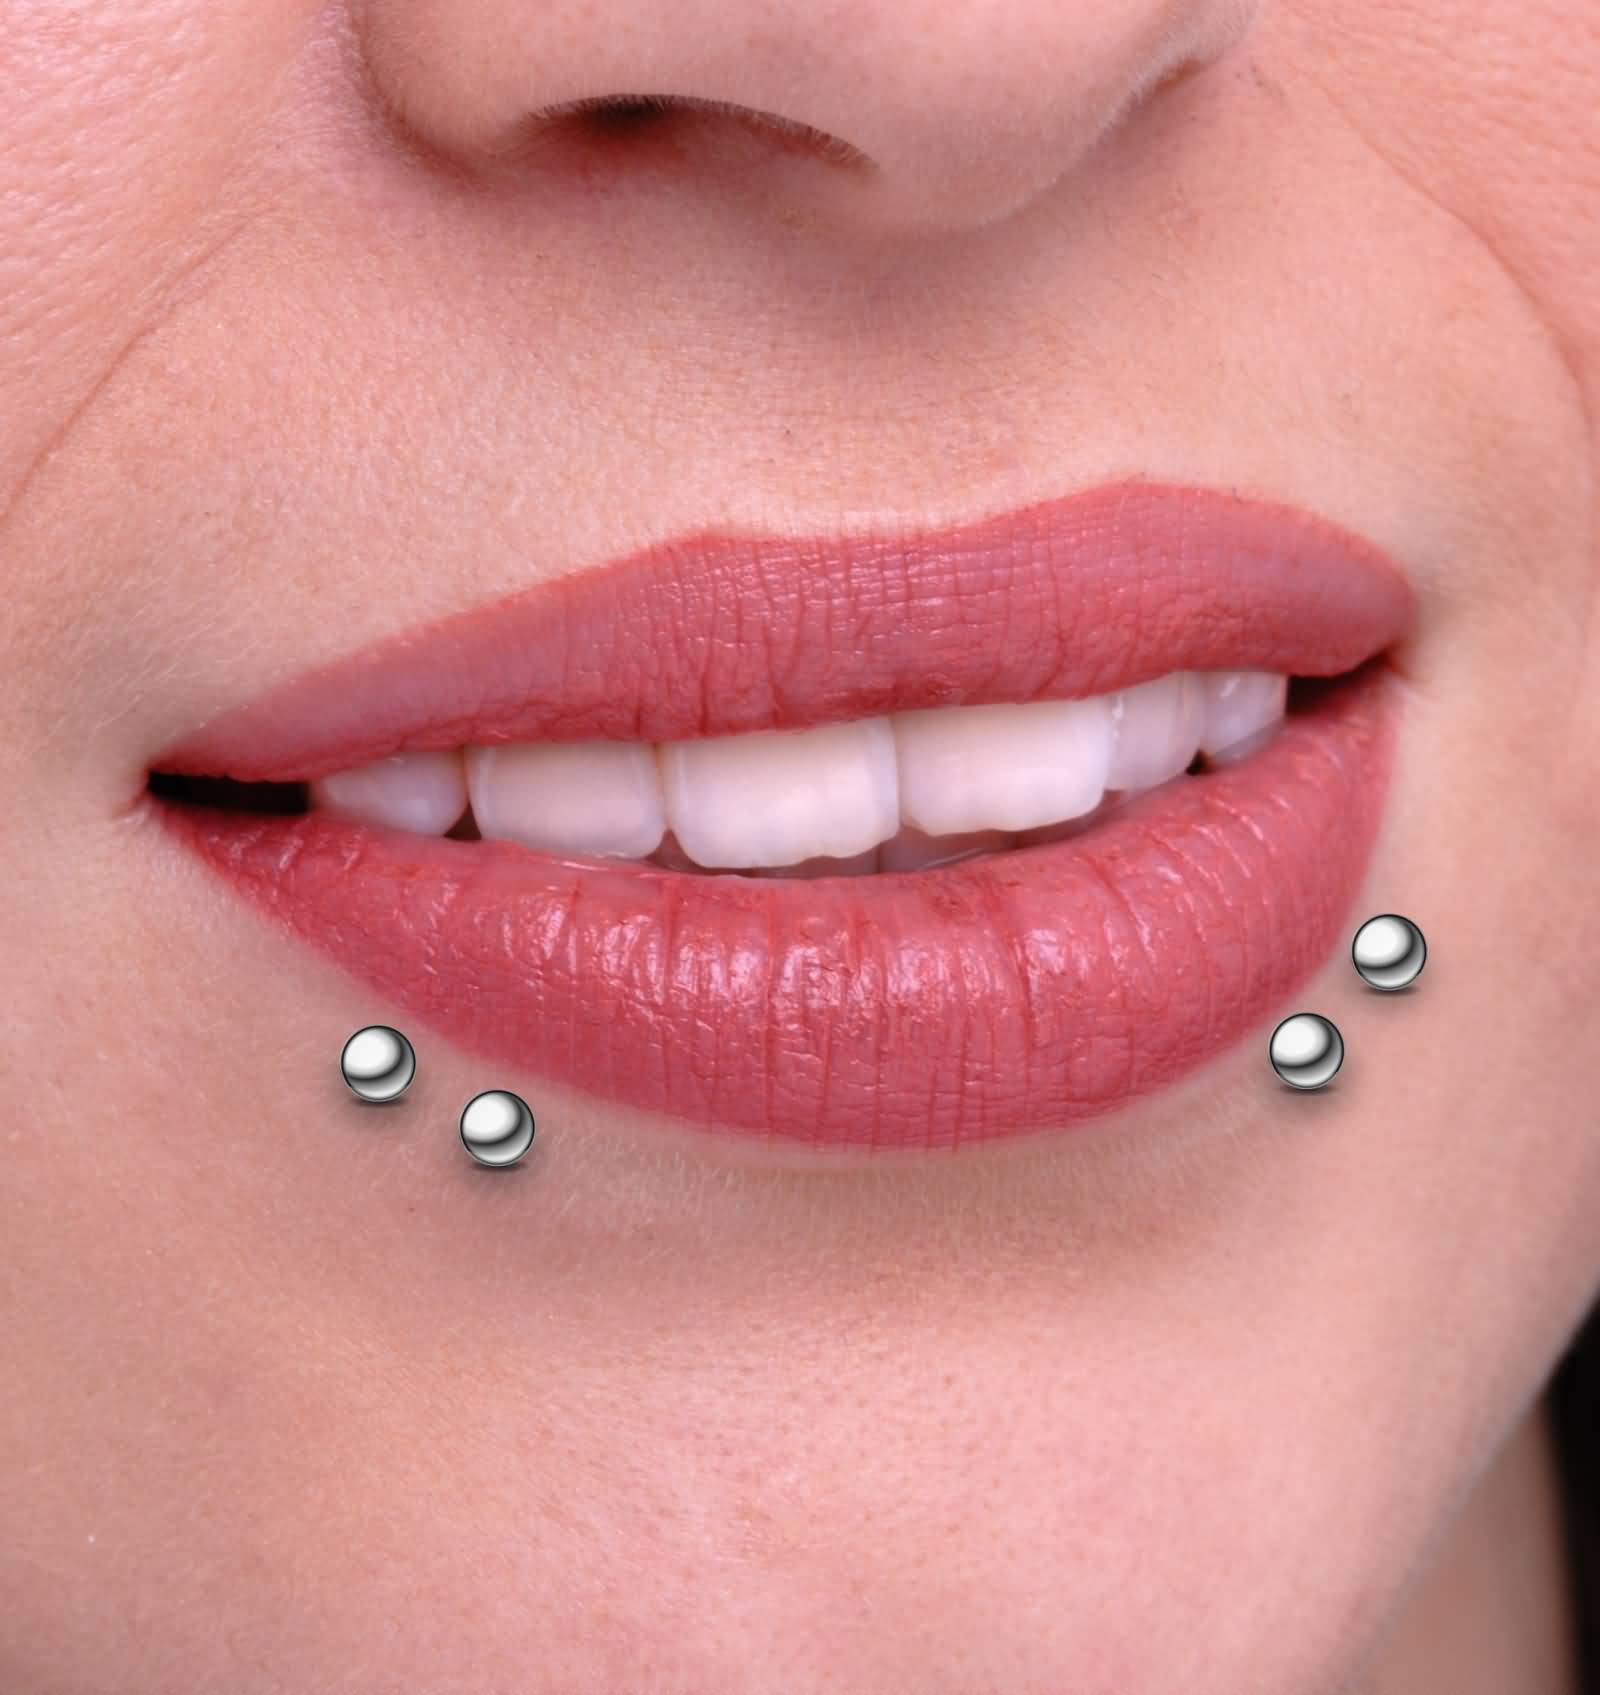 Silver Studs Shark Bites Piercing For Young Girls